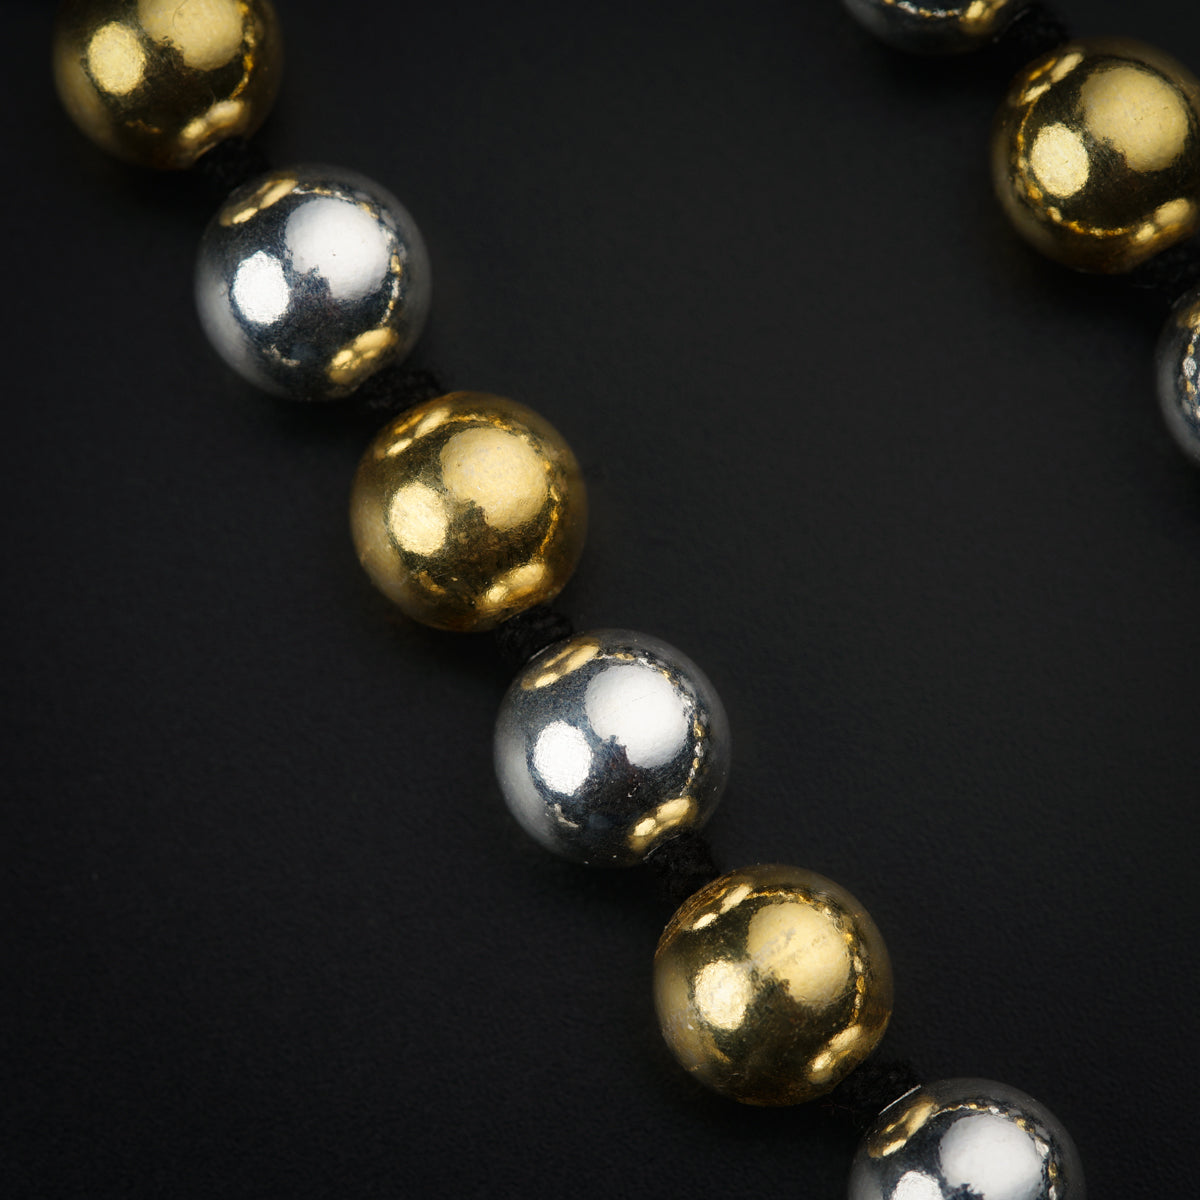 a gold and silver bead necklace on a black background